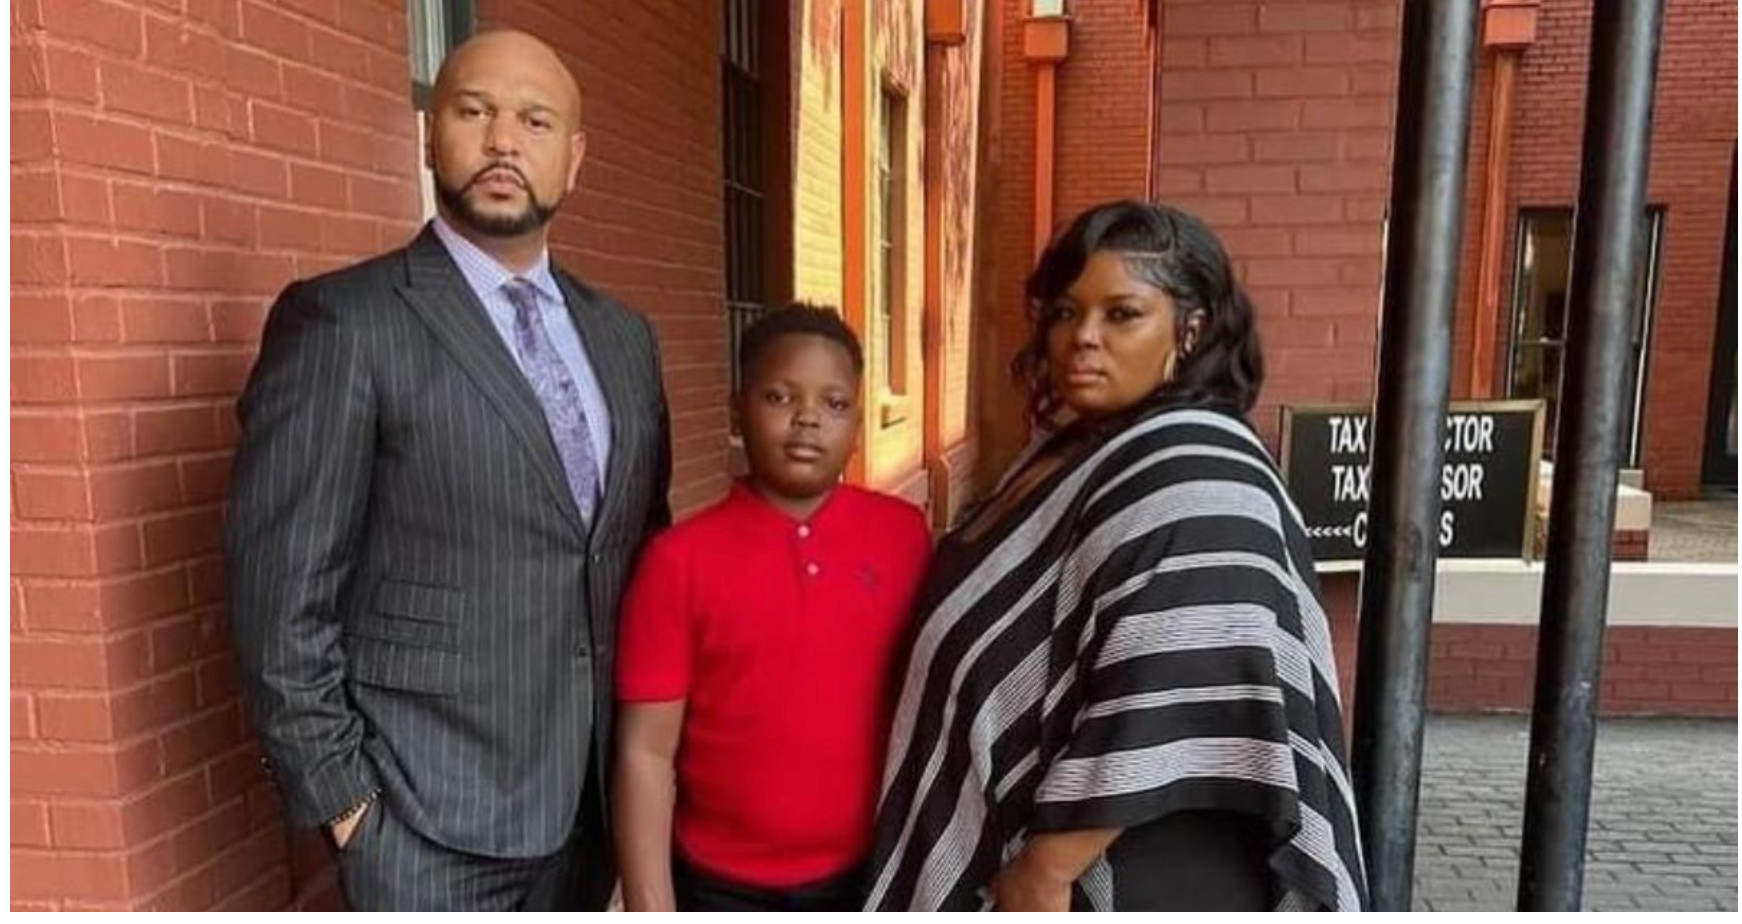 The Case Against A Black Child Arrested For Urinating In Public Has Been Dismissed